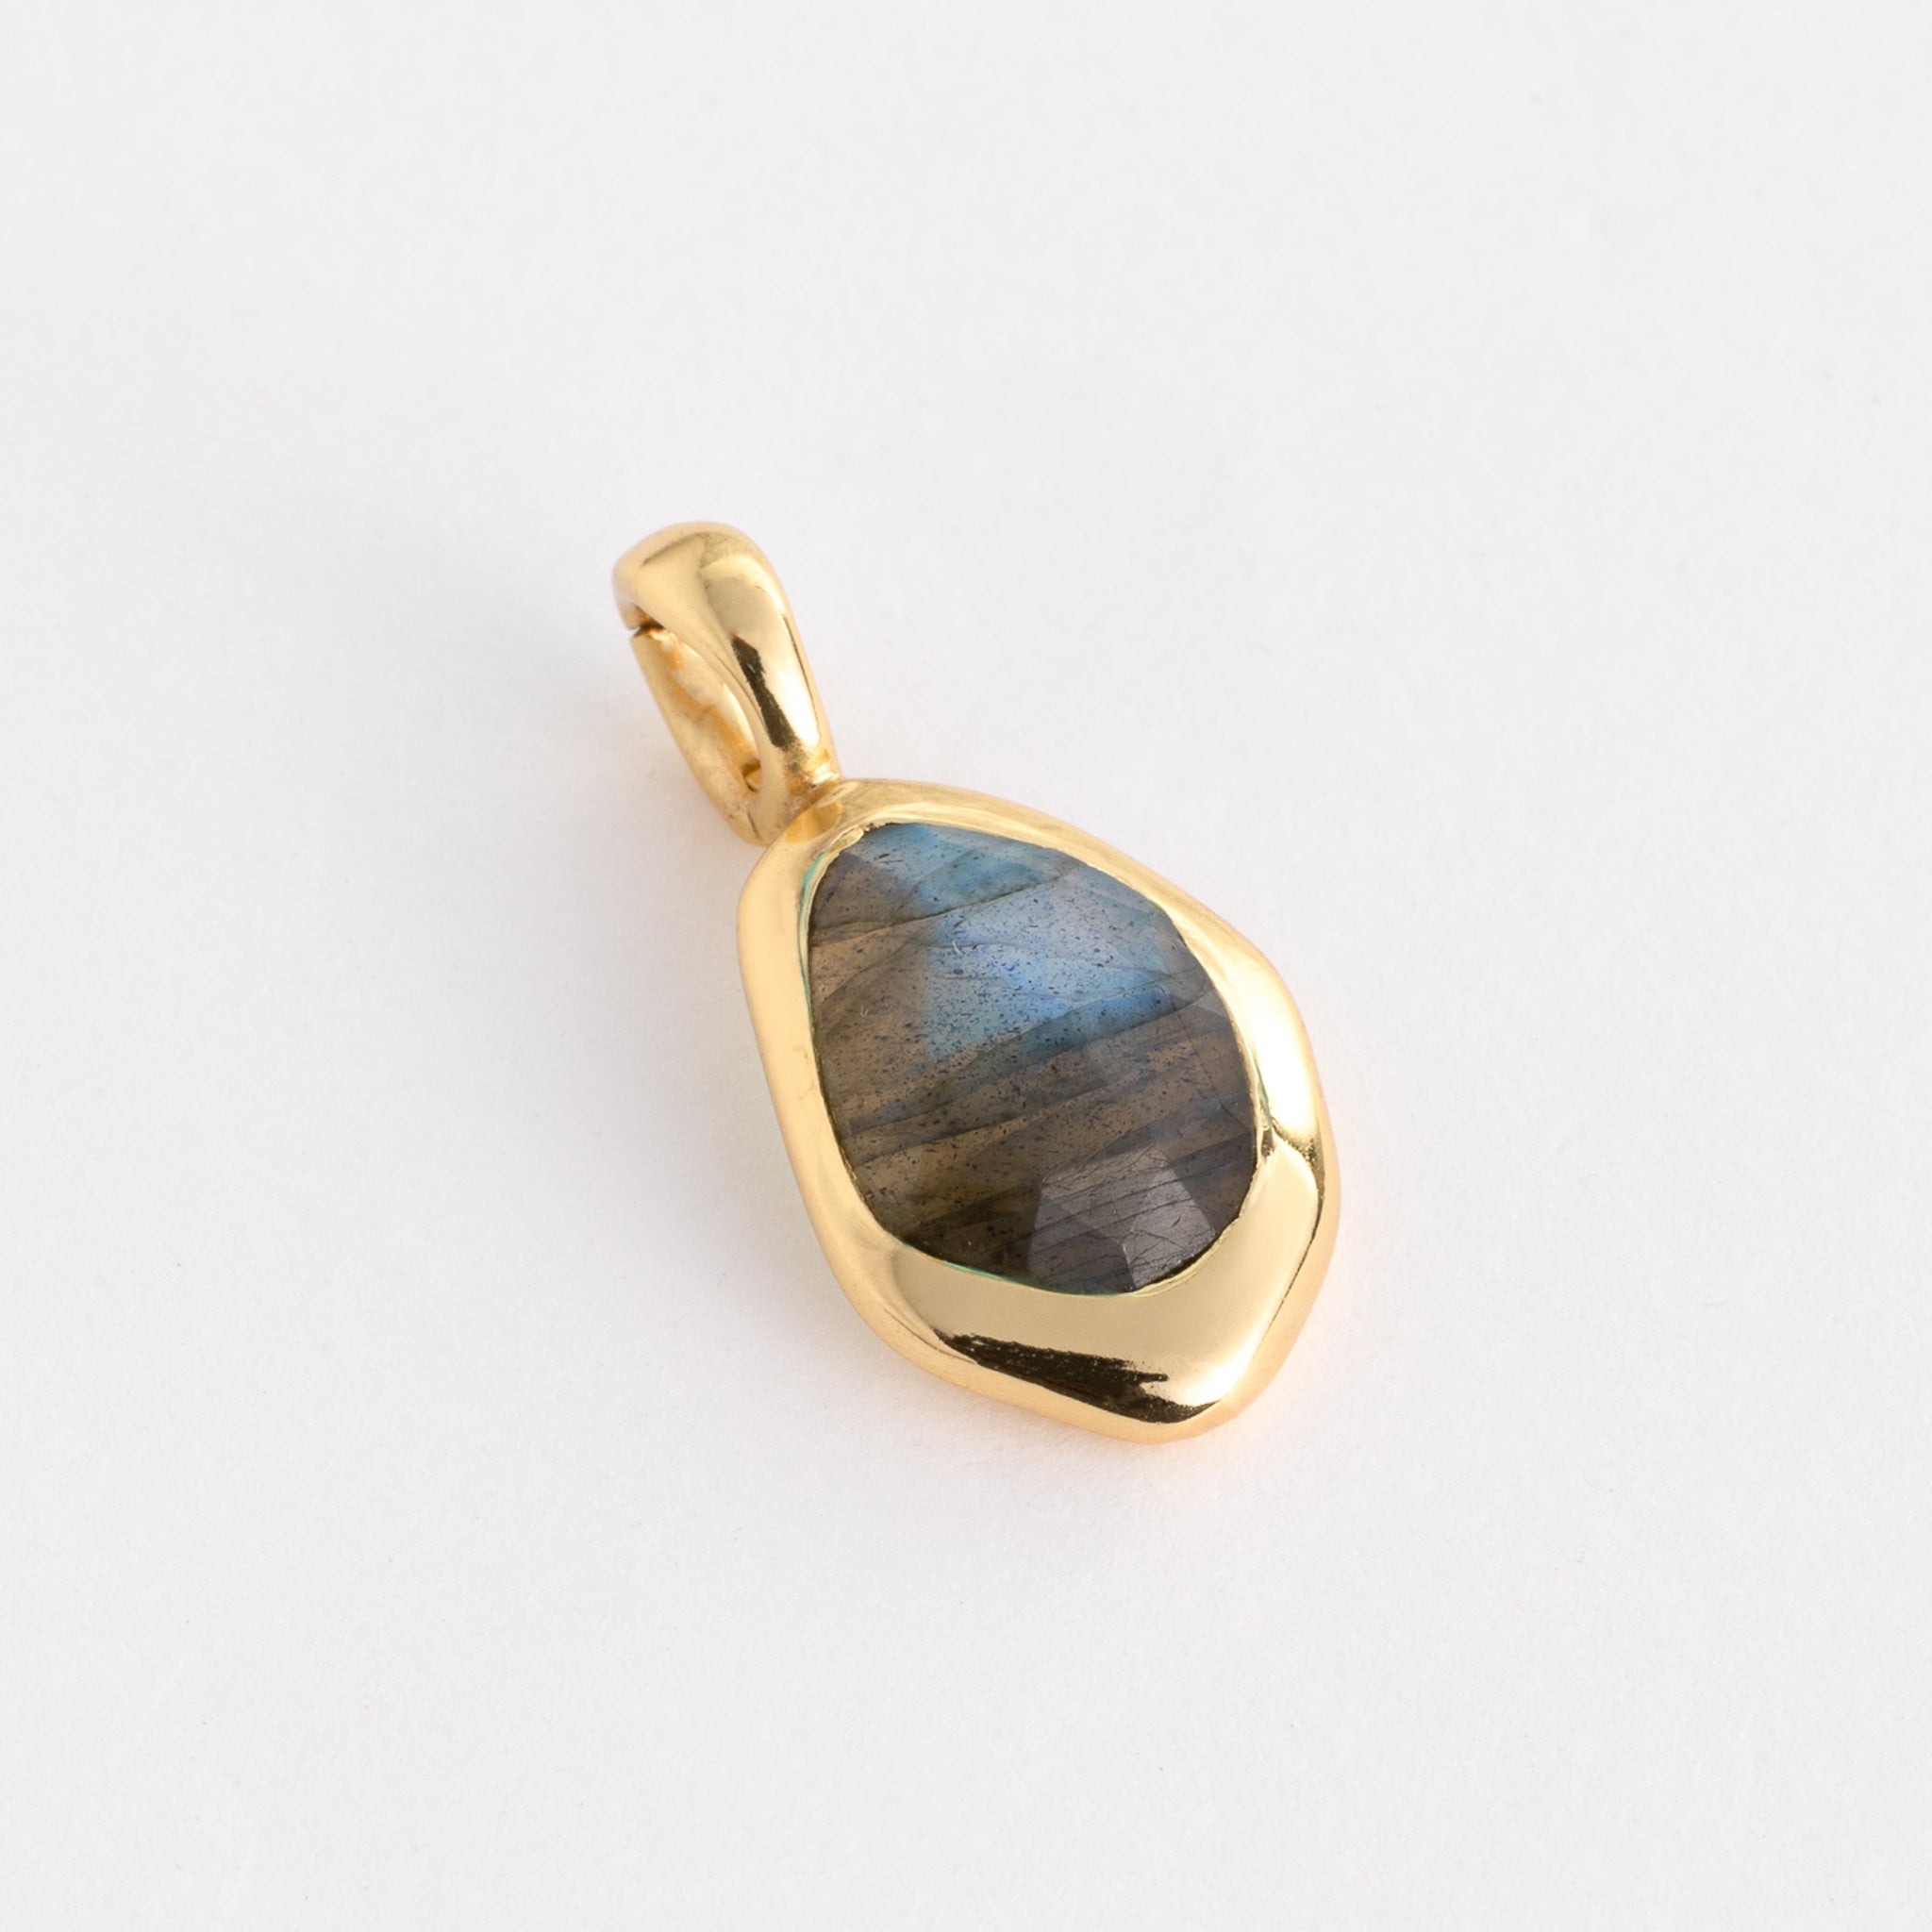 Charm features a sparkling, handcut natural gemstone and is crafted from sterling silver or 18ct gold vermeil.